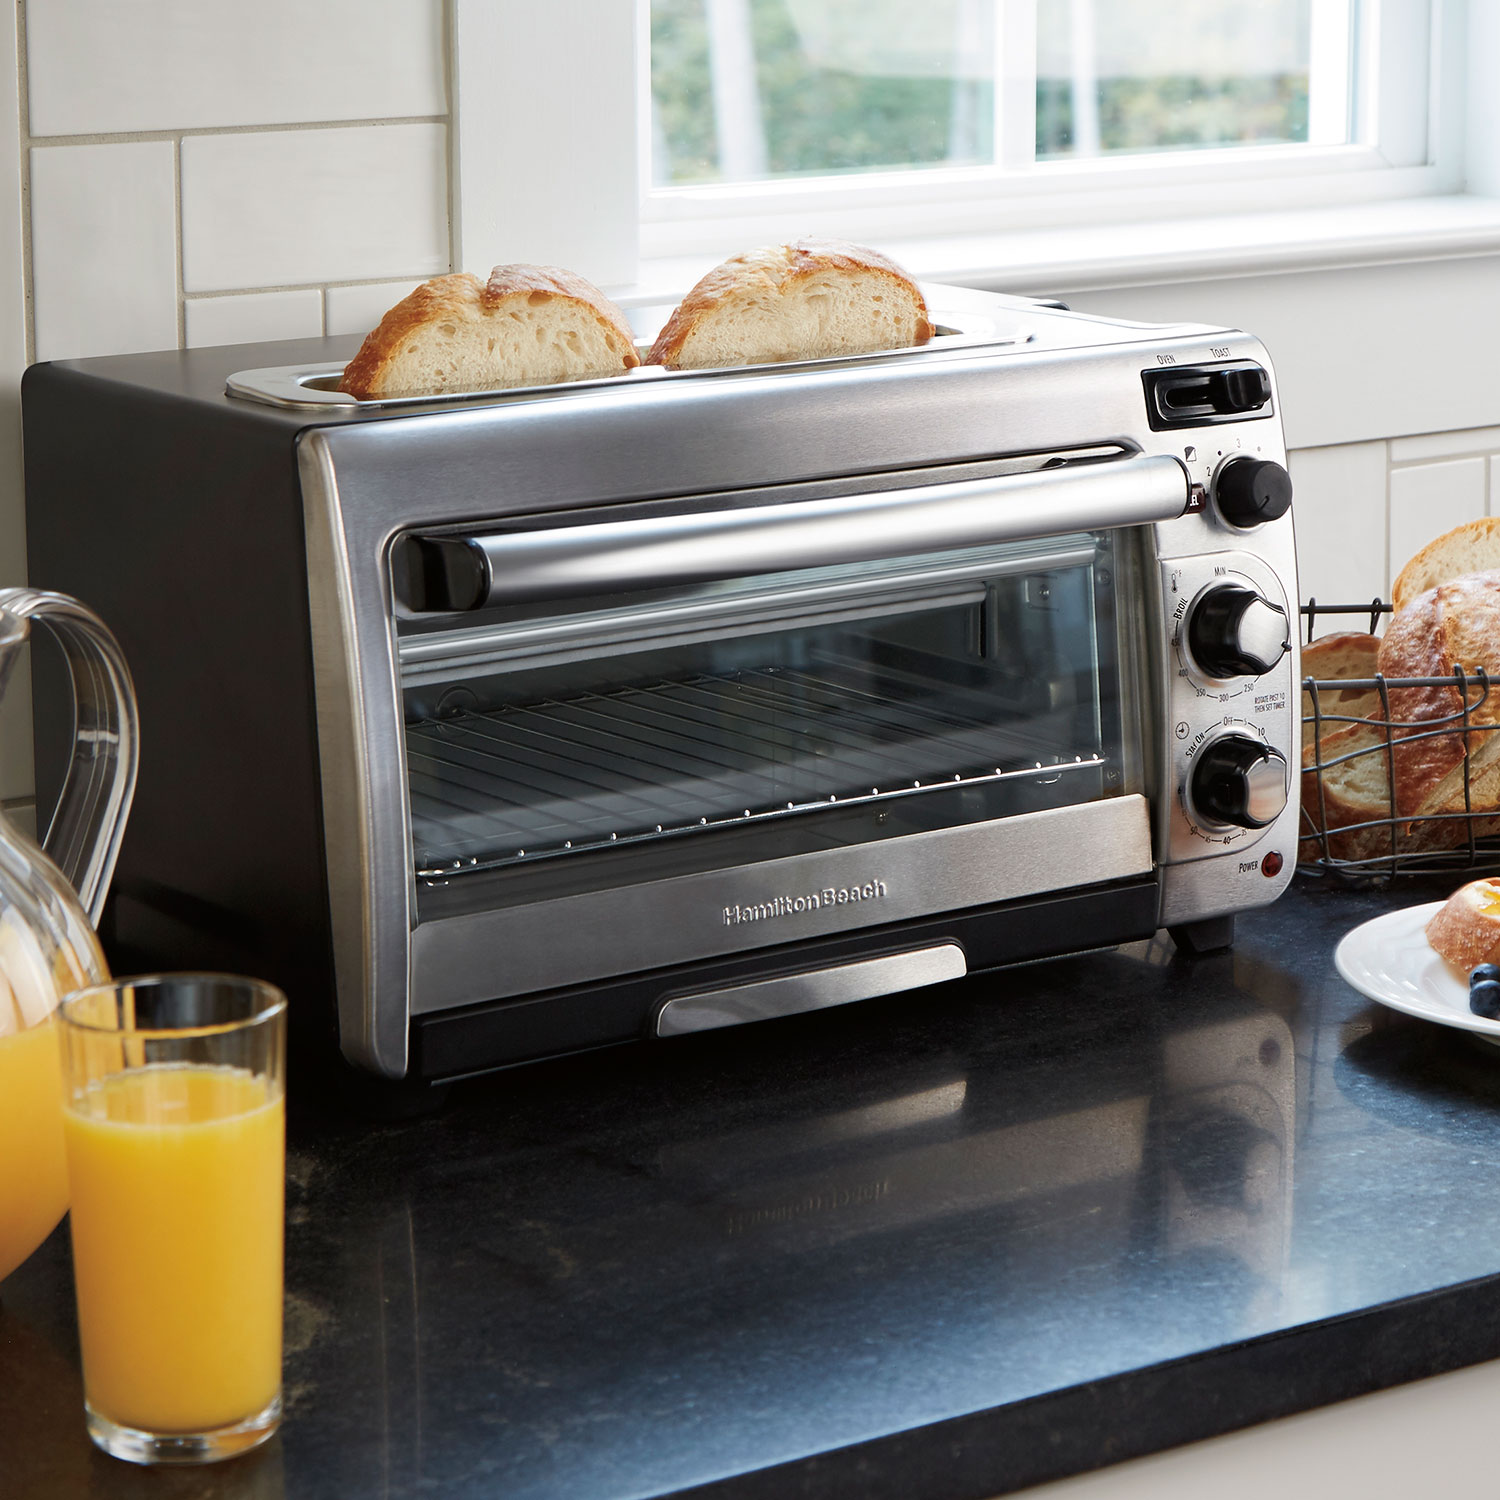 2-in-1 Oven and Toaster (31156-CN)